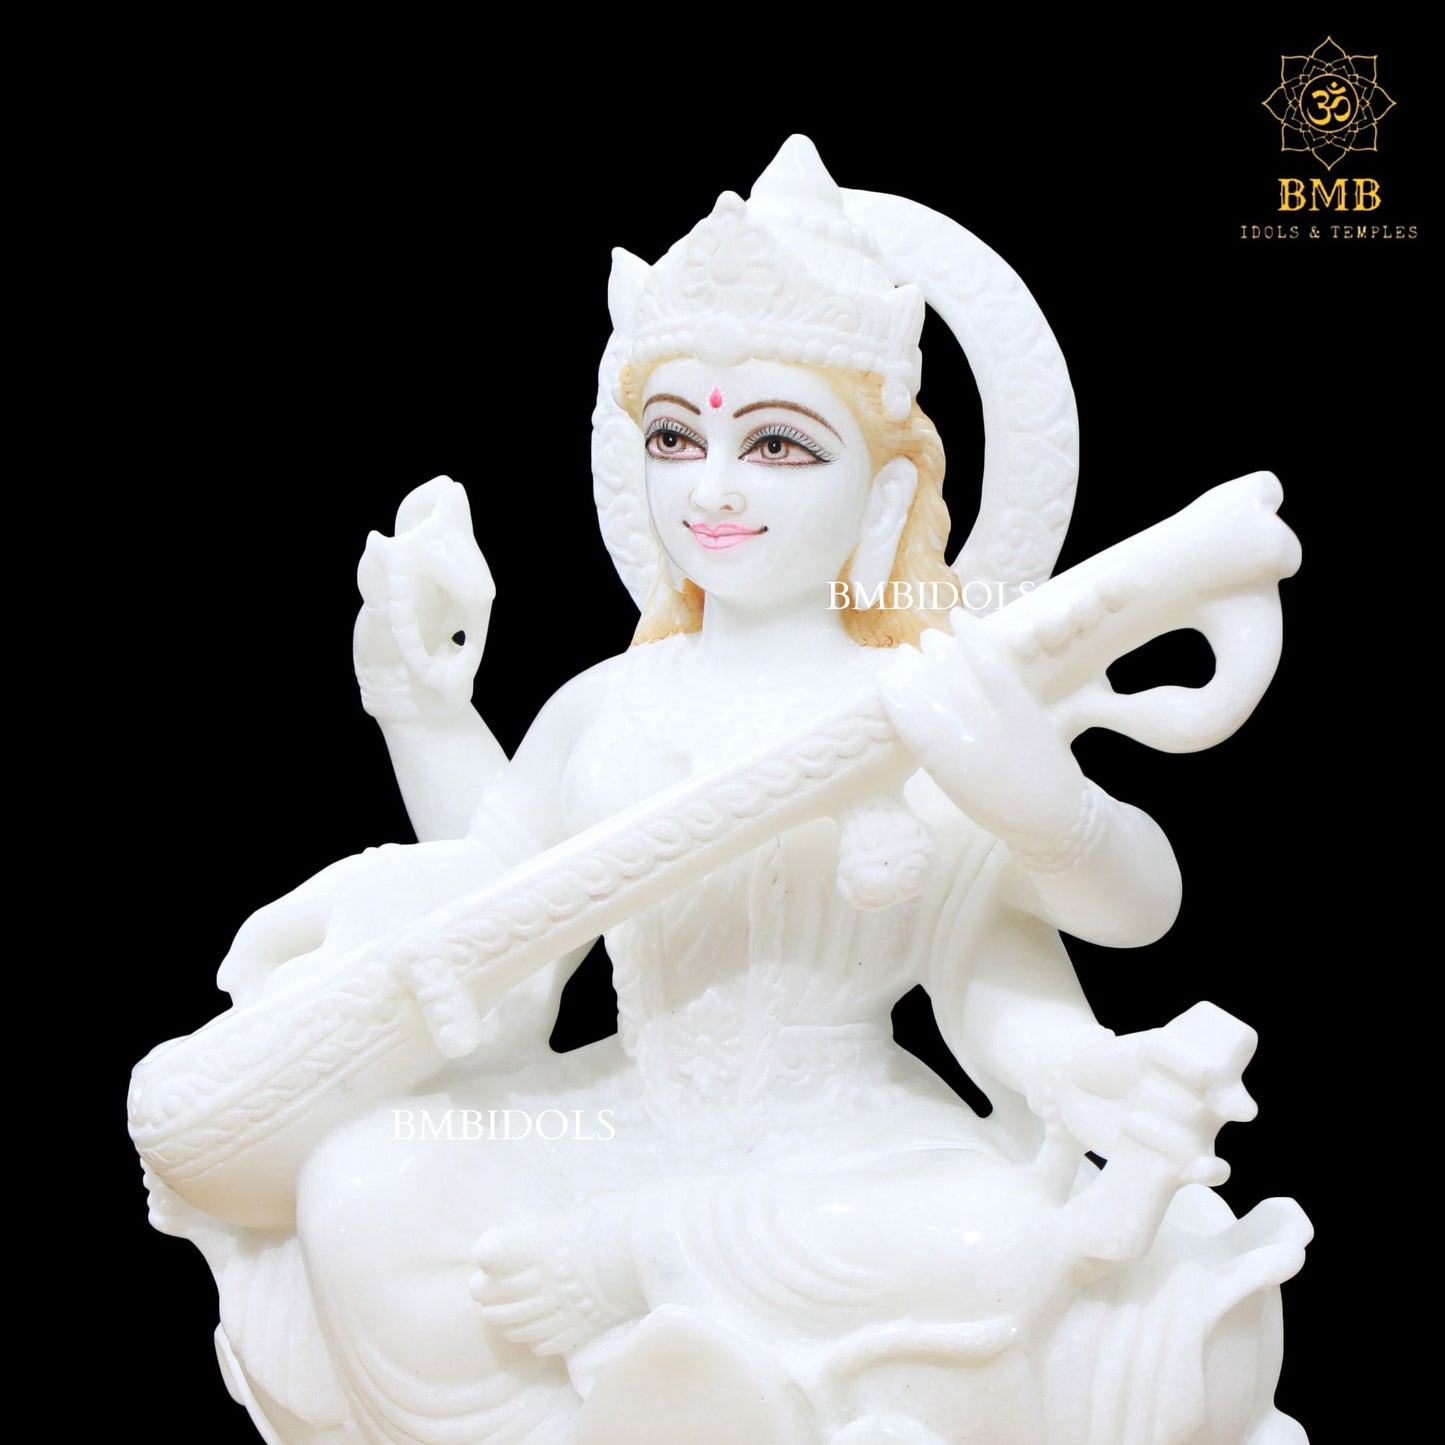 Marble Saraswati Maa Murti in 15inches for Homes and Temples